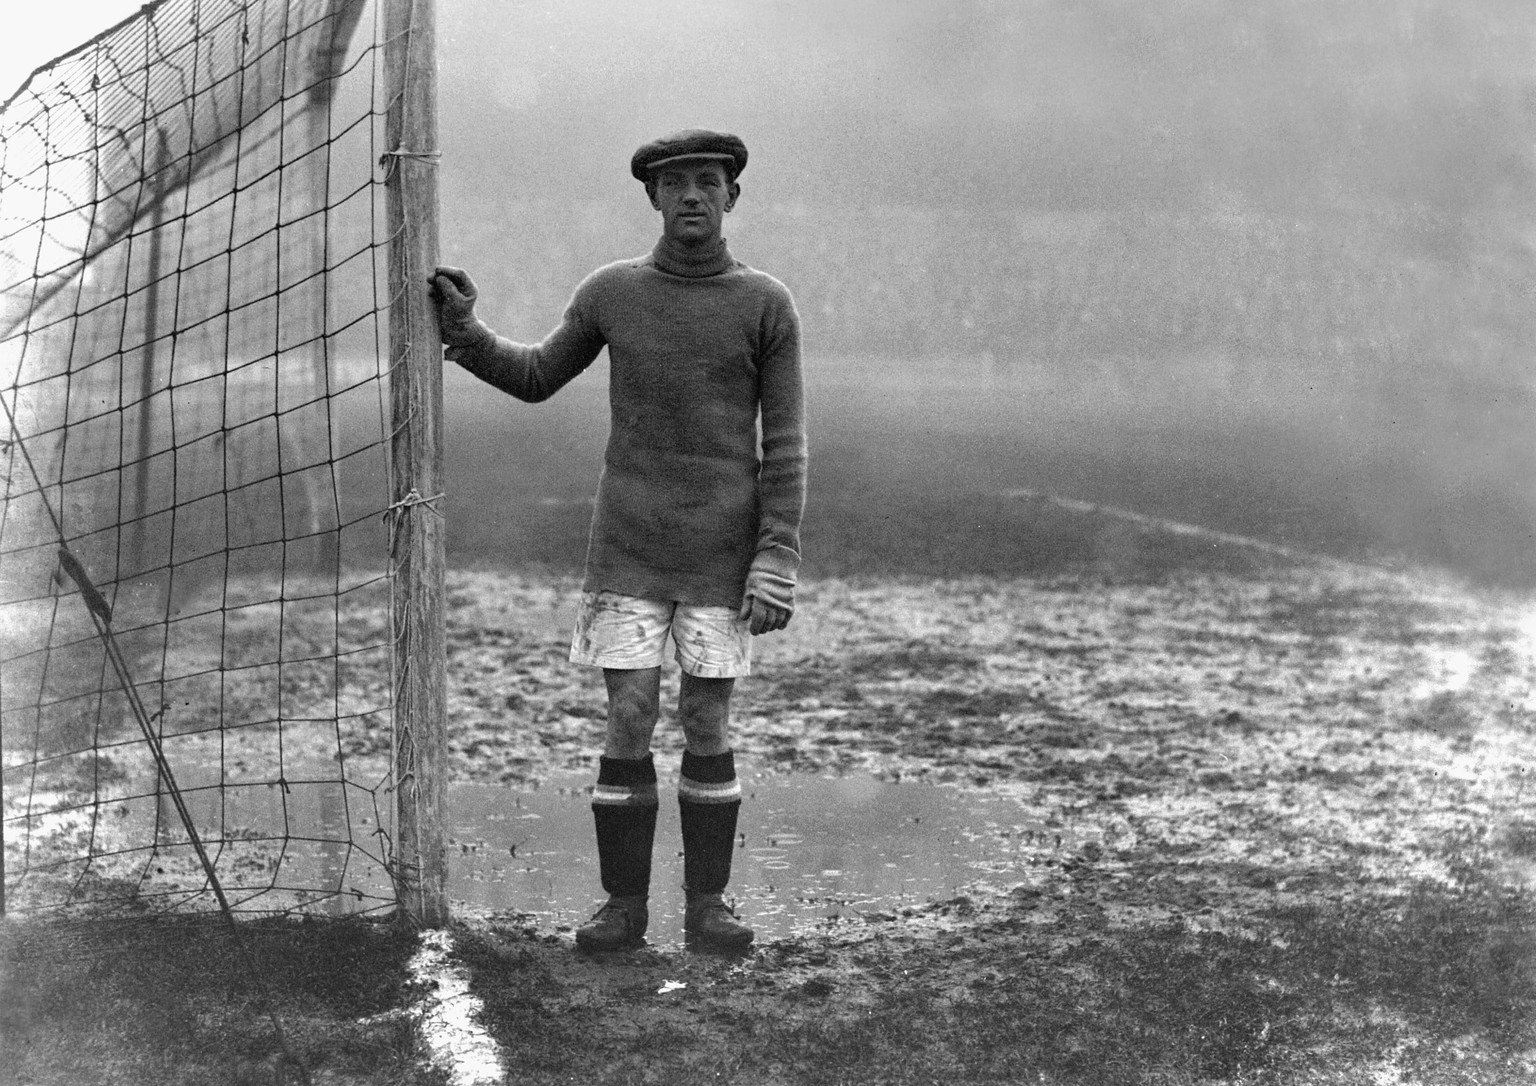 Bildnummer: 07989840 Datum: 02.08.1925 Copyright: imago/Colorsport
Football in Muddy Conditions William Billy Mercer the Huddersfield Town goalkeeper poses in the goalmouth after a heavy Rain downpou ...